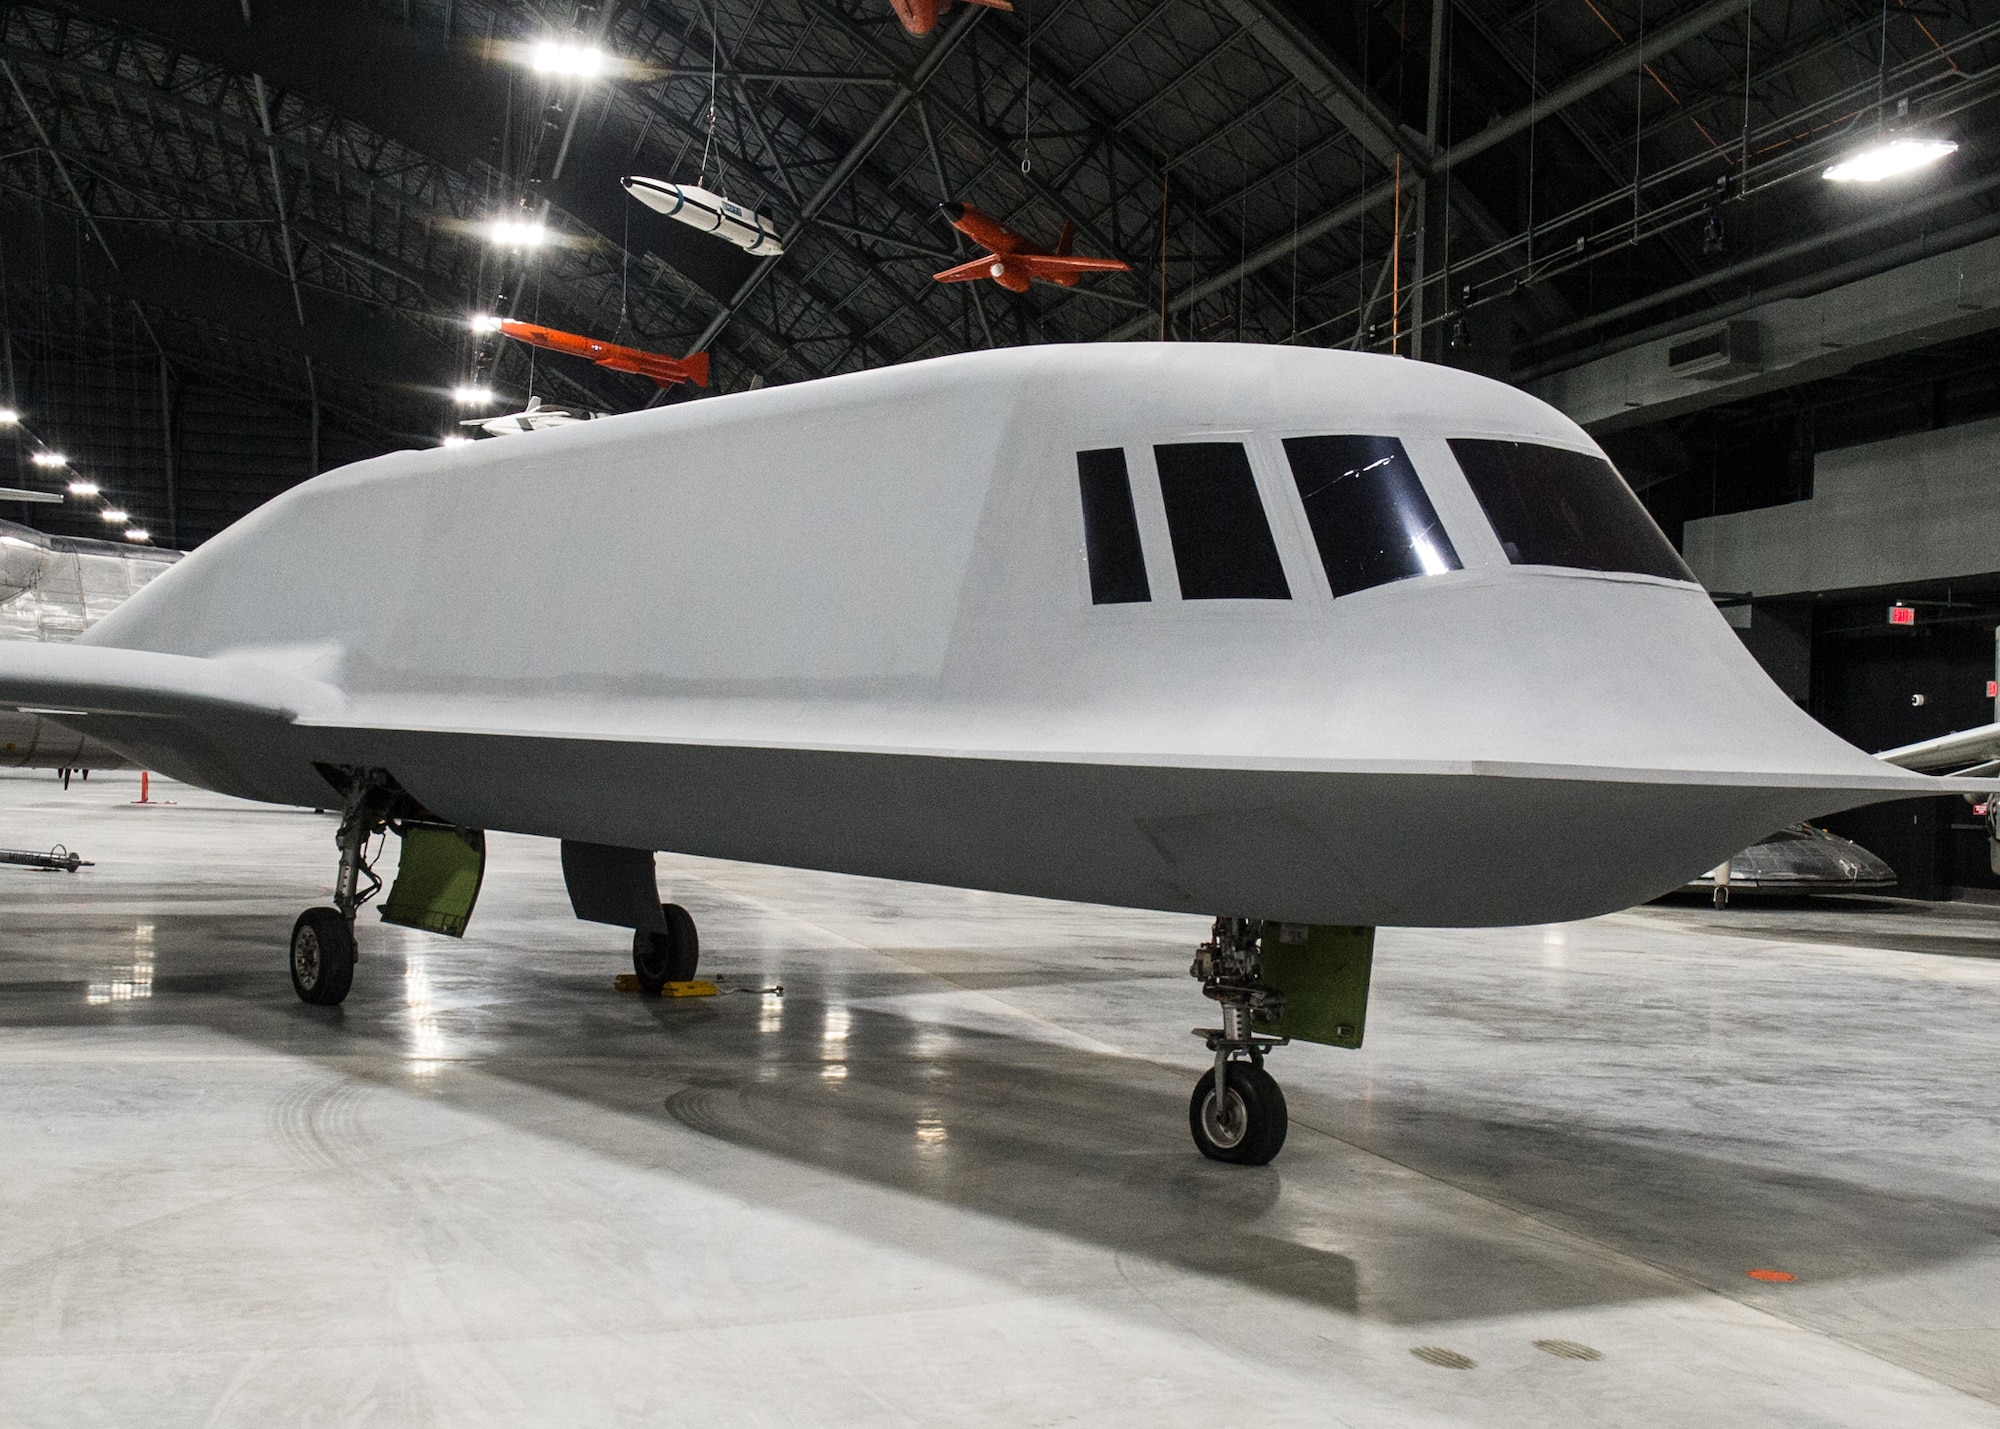 Northrop Tacit Blue in the Research & Development Gallery at the National Museum of the U.S. Air Force on December 28, 2015. (U.S. Air Force photo)